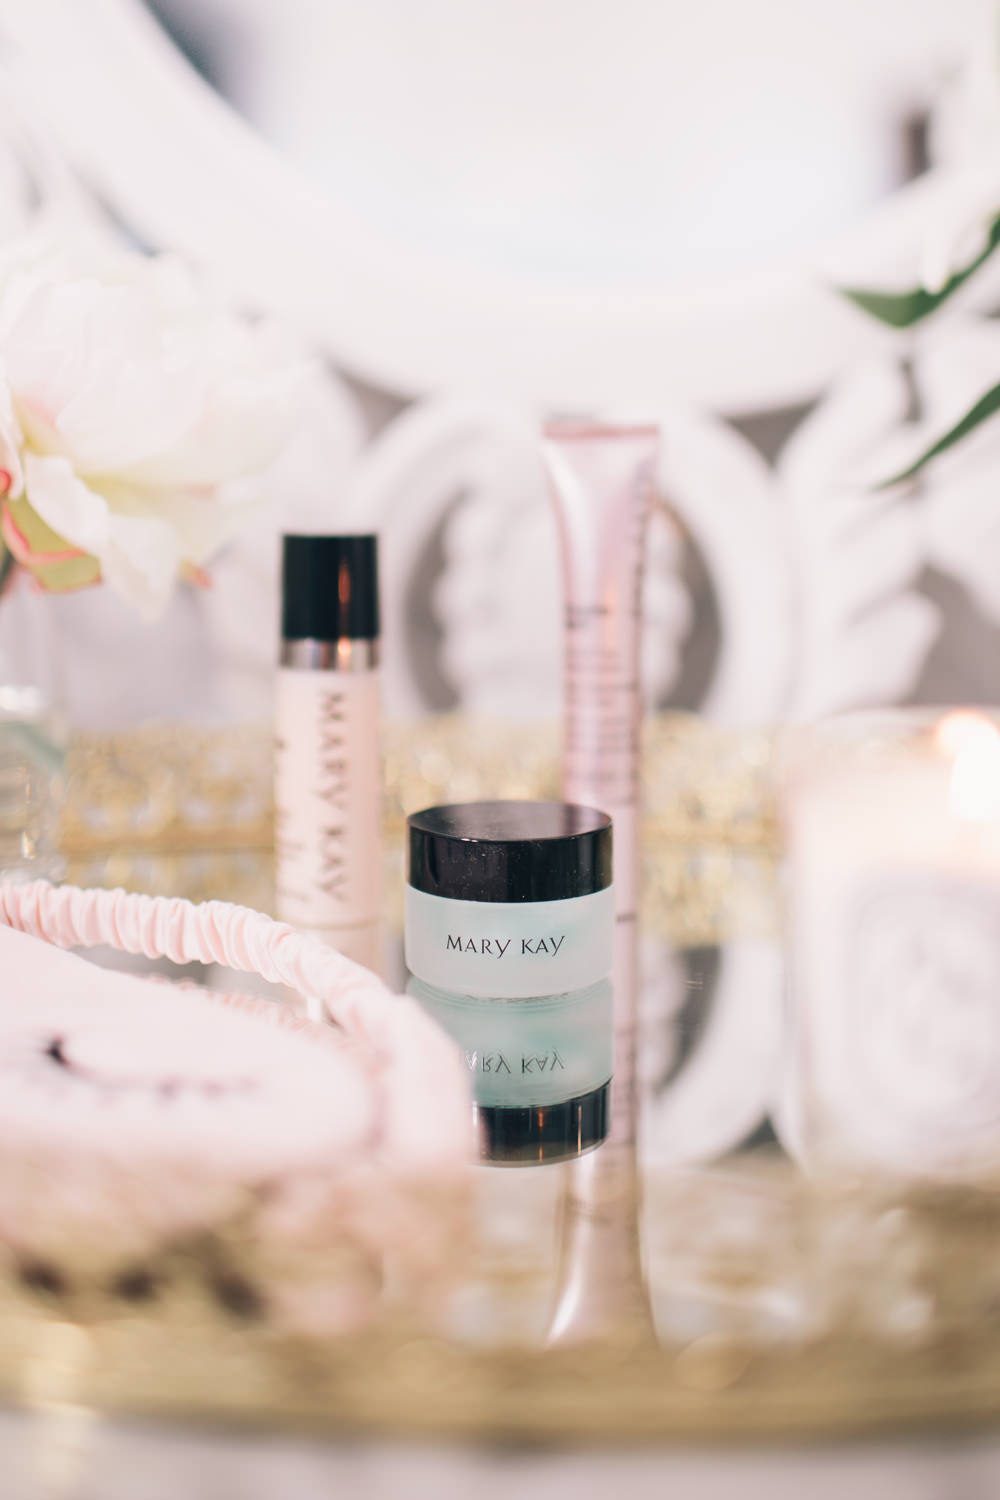 Caitlin Lindquist of the beauty blog Dash of Darling shares ways to sleep soundly and get your beauty sleep.